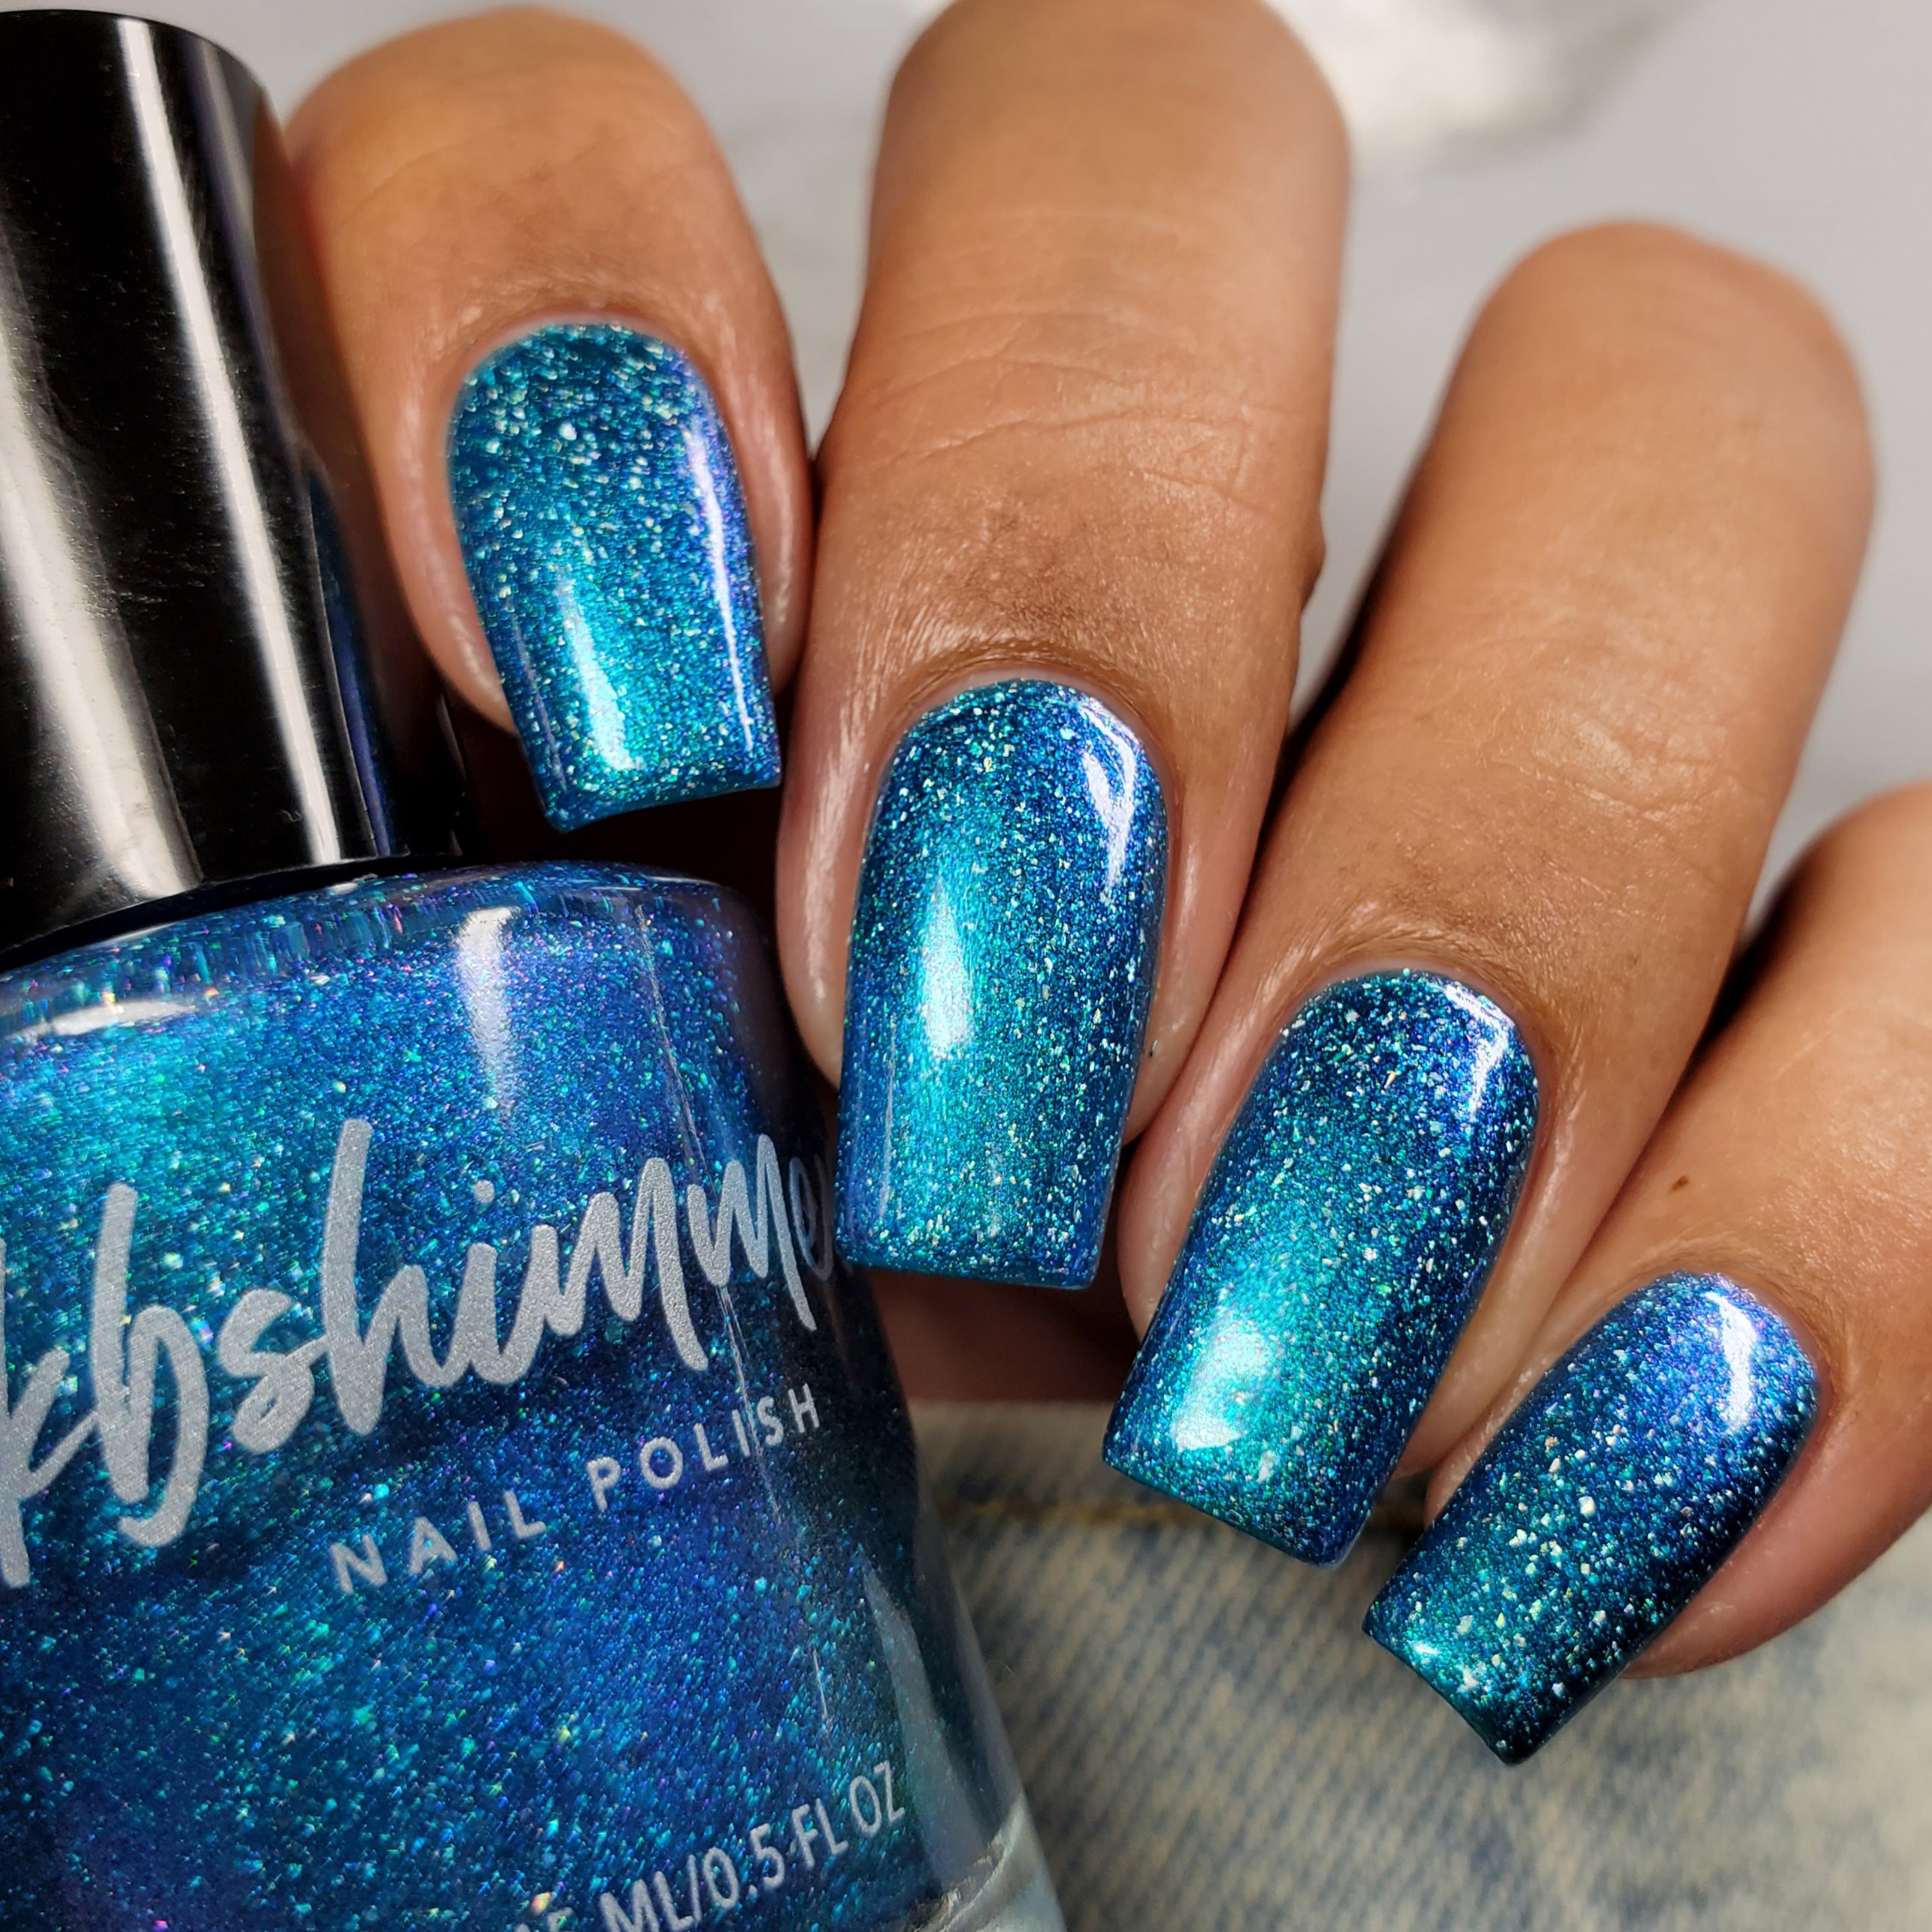 KBShimmer Put A Ring On It Holo Glow Flake Nail Polish